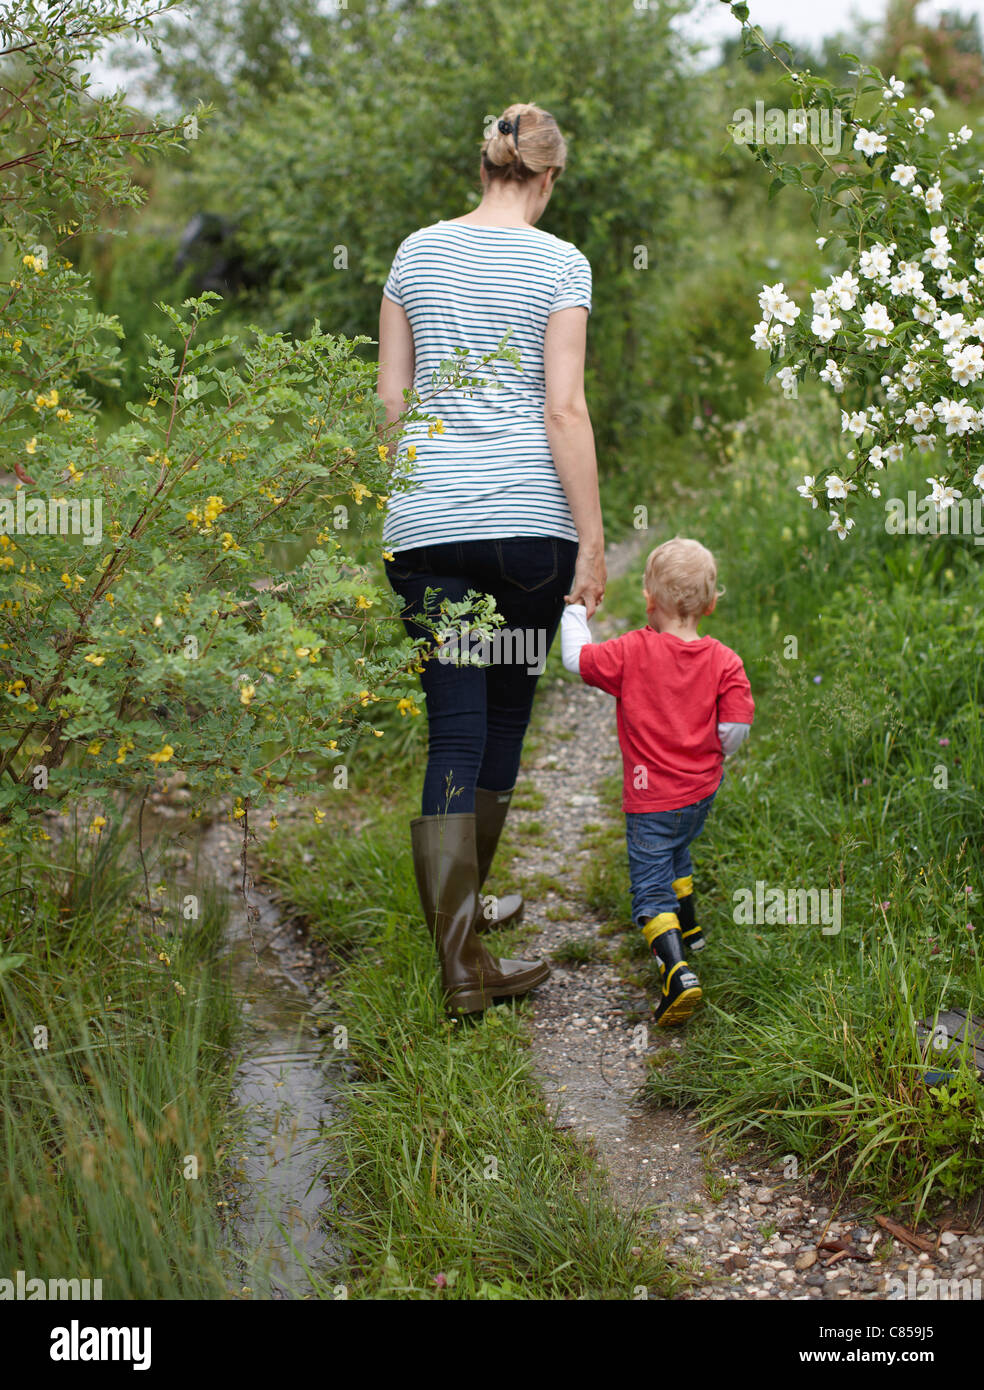 Mother and son walking on dirt path Stock Photo